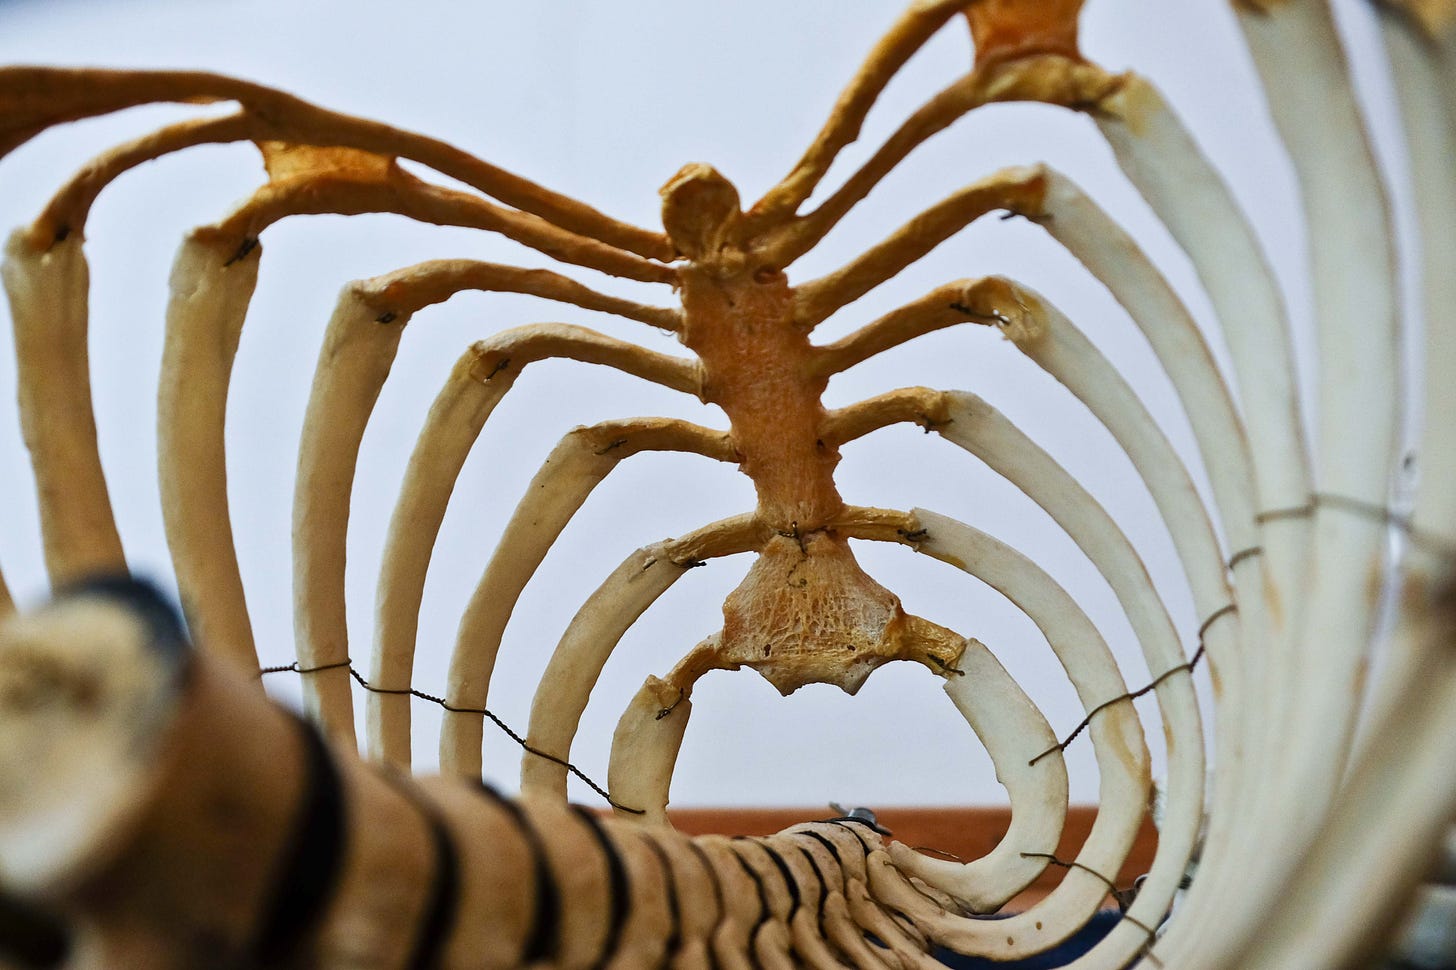 Rib cage of a skeleton